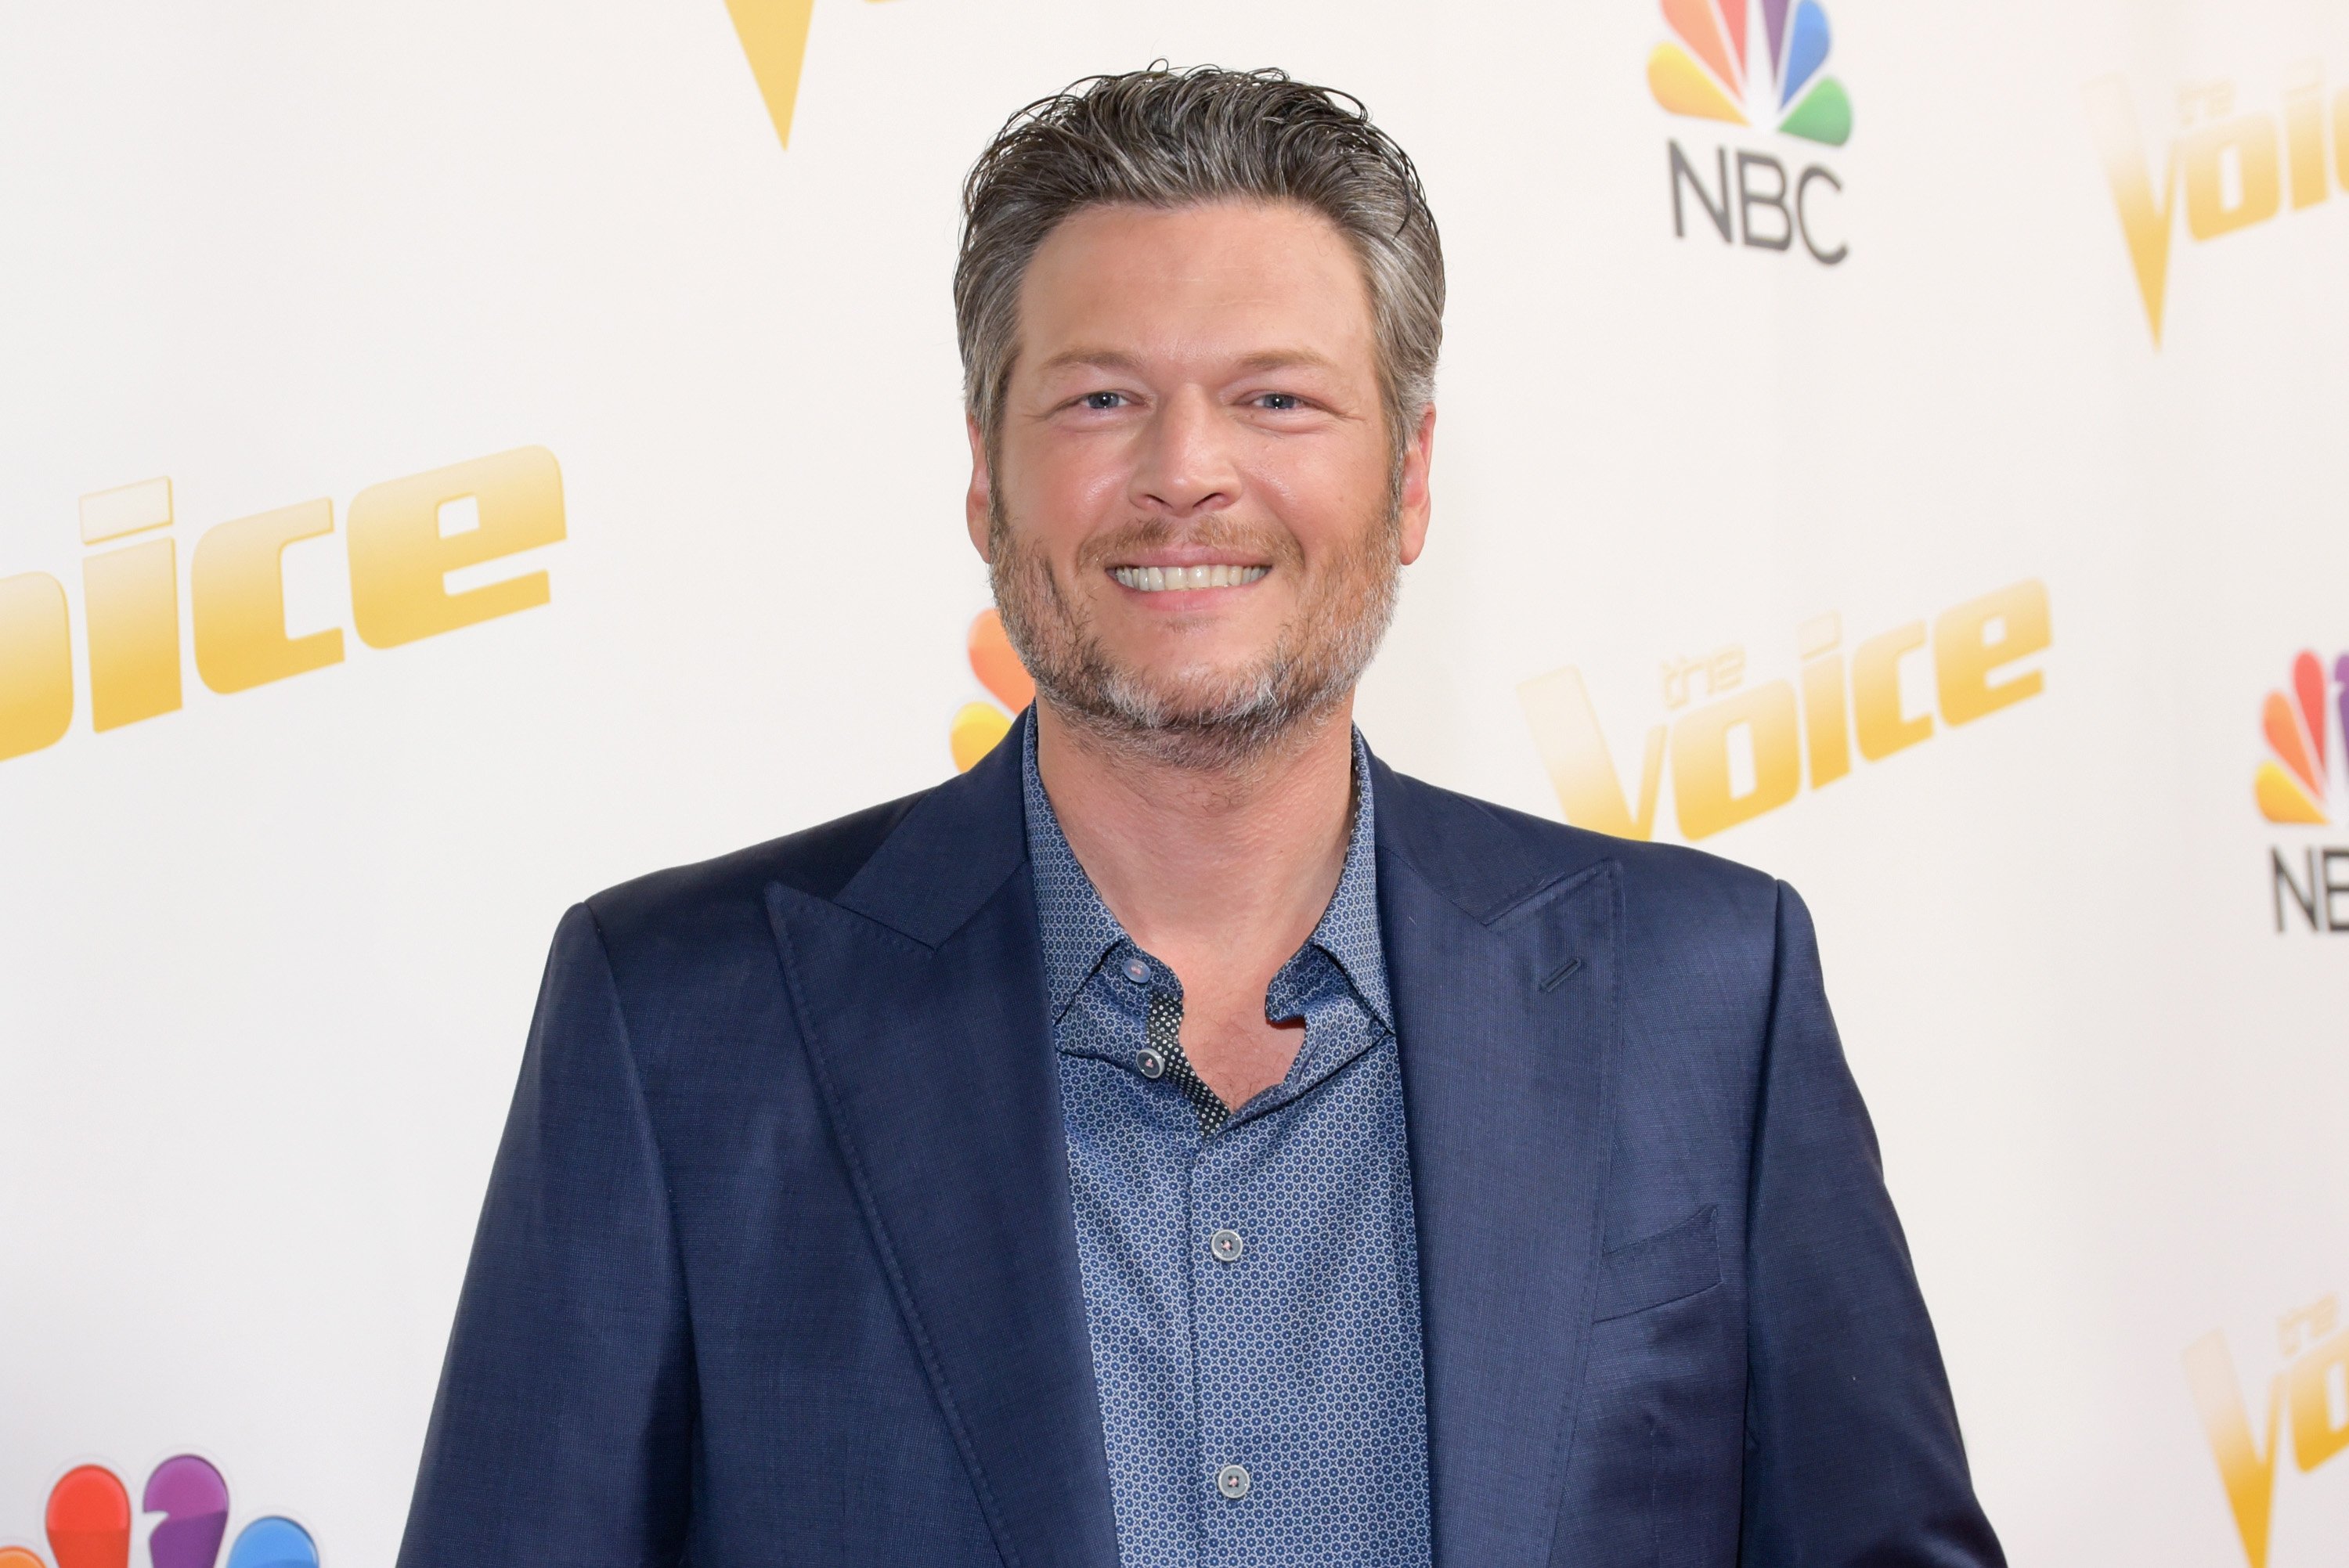 Blake Shelton attends NBC's 'The Voice' Season 14 taping on April 23, 2018. | Photo: GettyImages